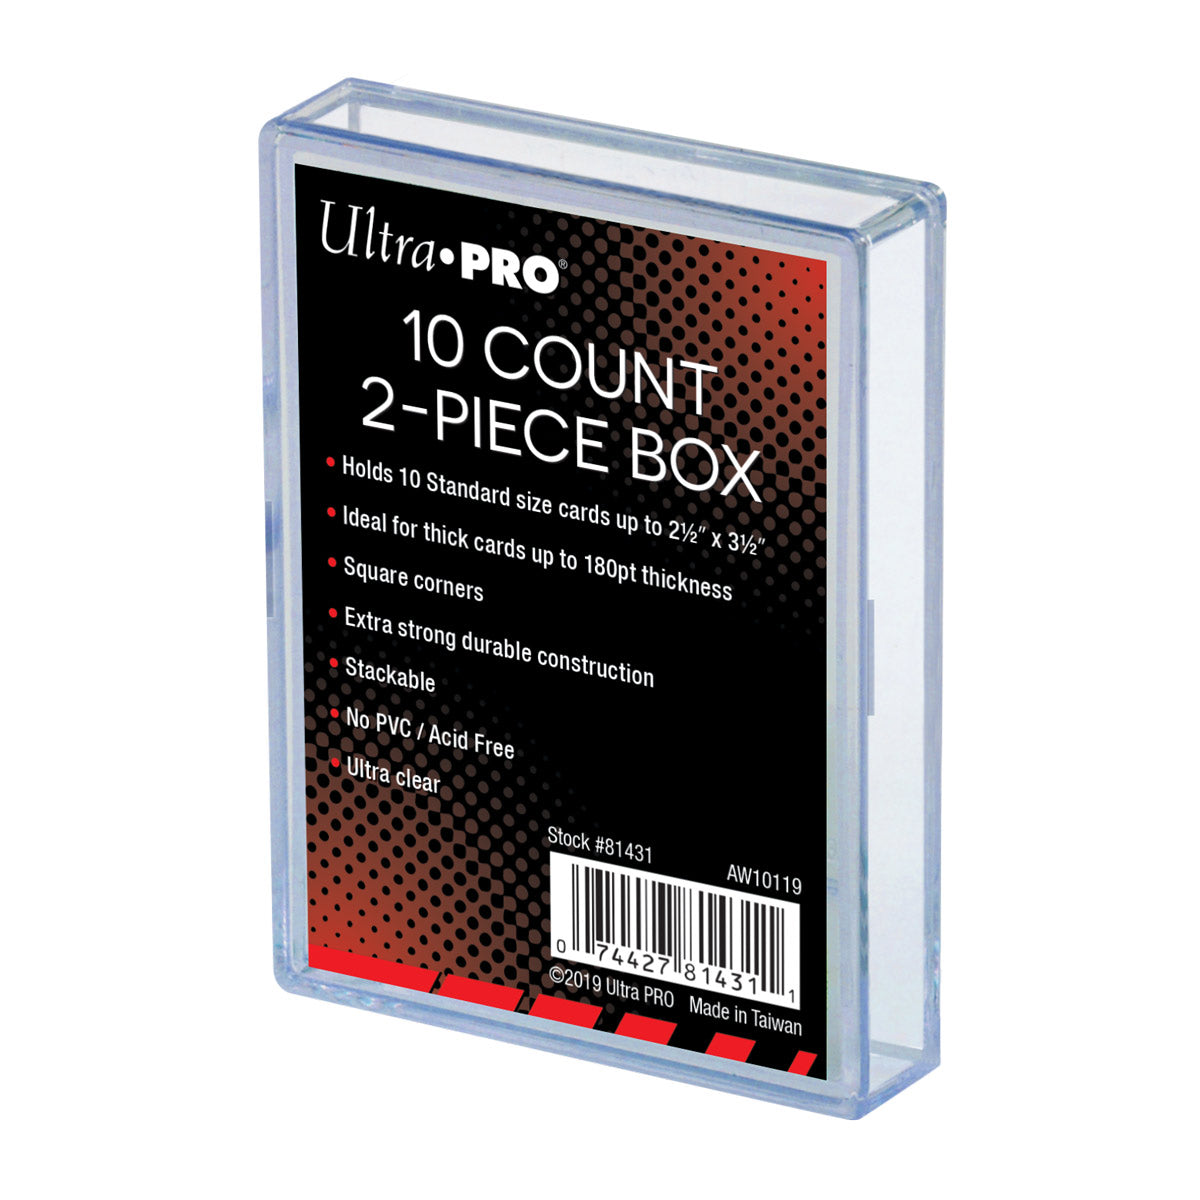 Ultra Pro 2-Piece Trading Card Box 10 Count